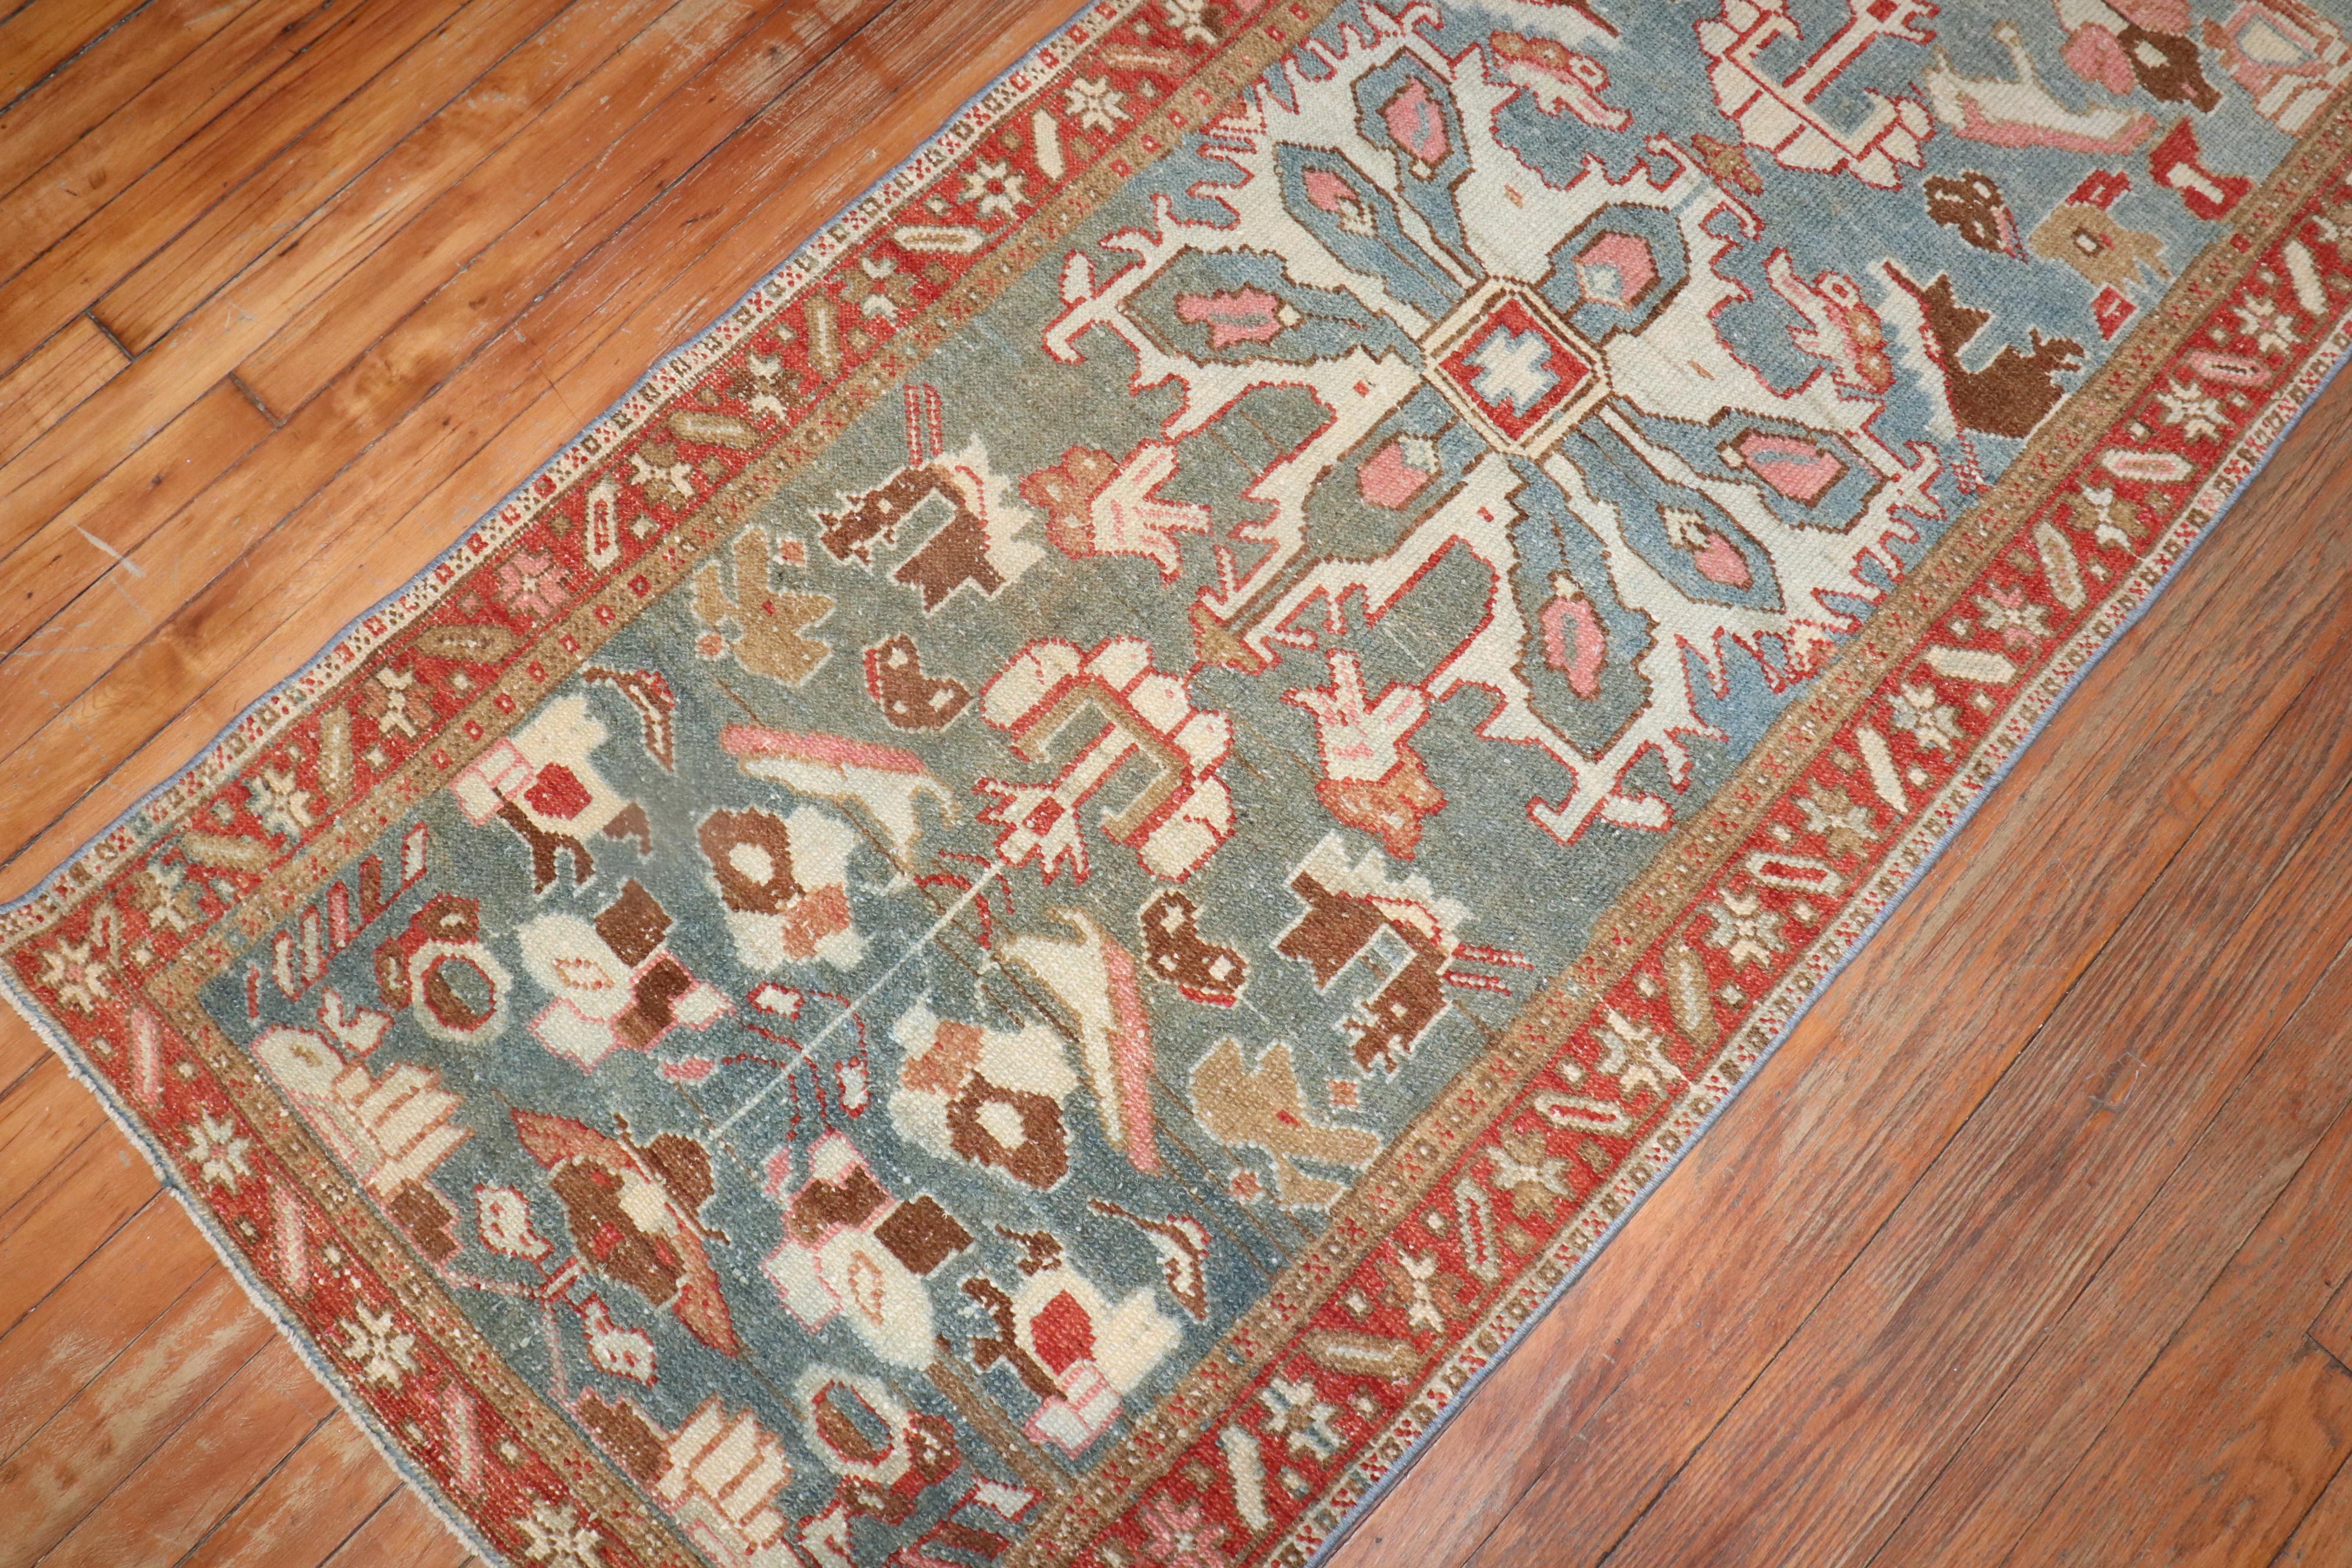 An earth-toned geometric 20th century Northwest Persian runner.

Measures: 2'9